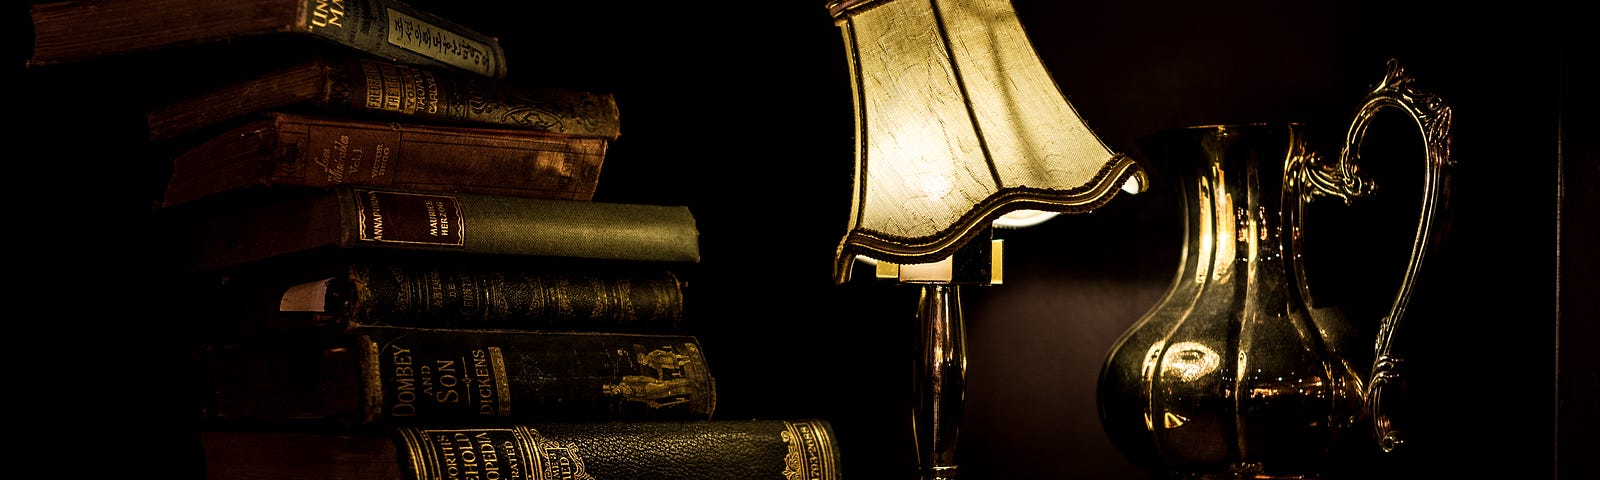 a lamp with a tilted shade between a silver pitcher and a stack of hardback books